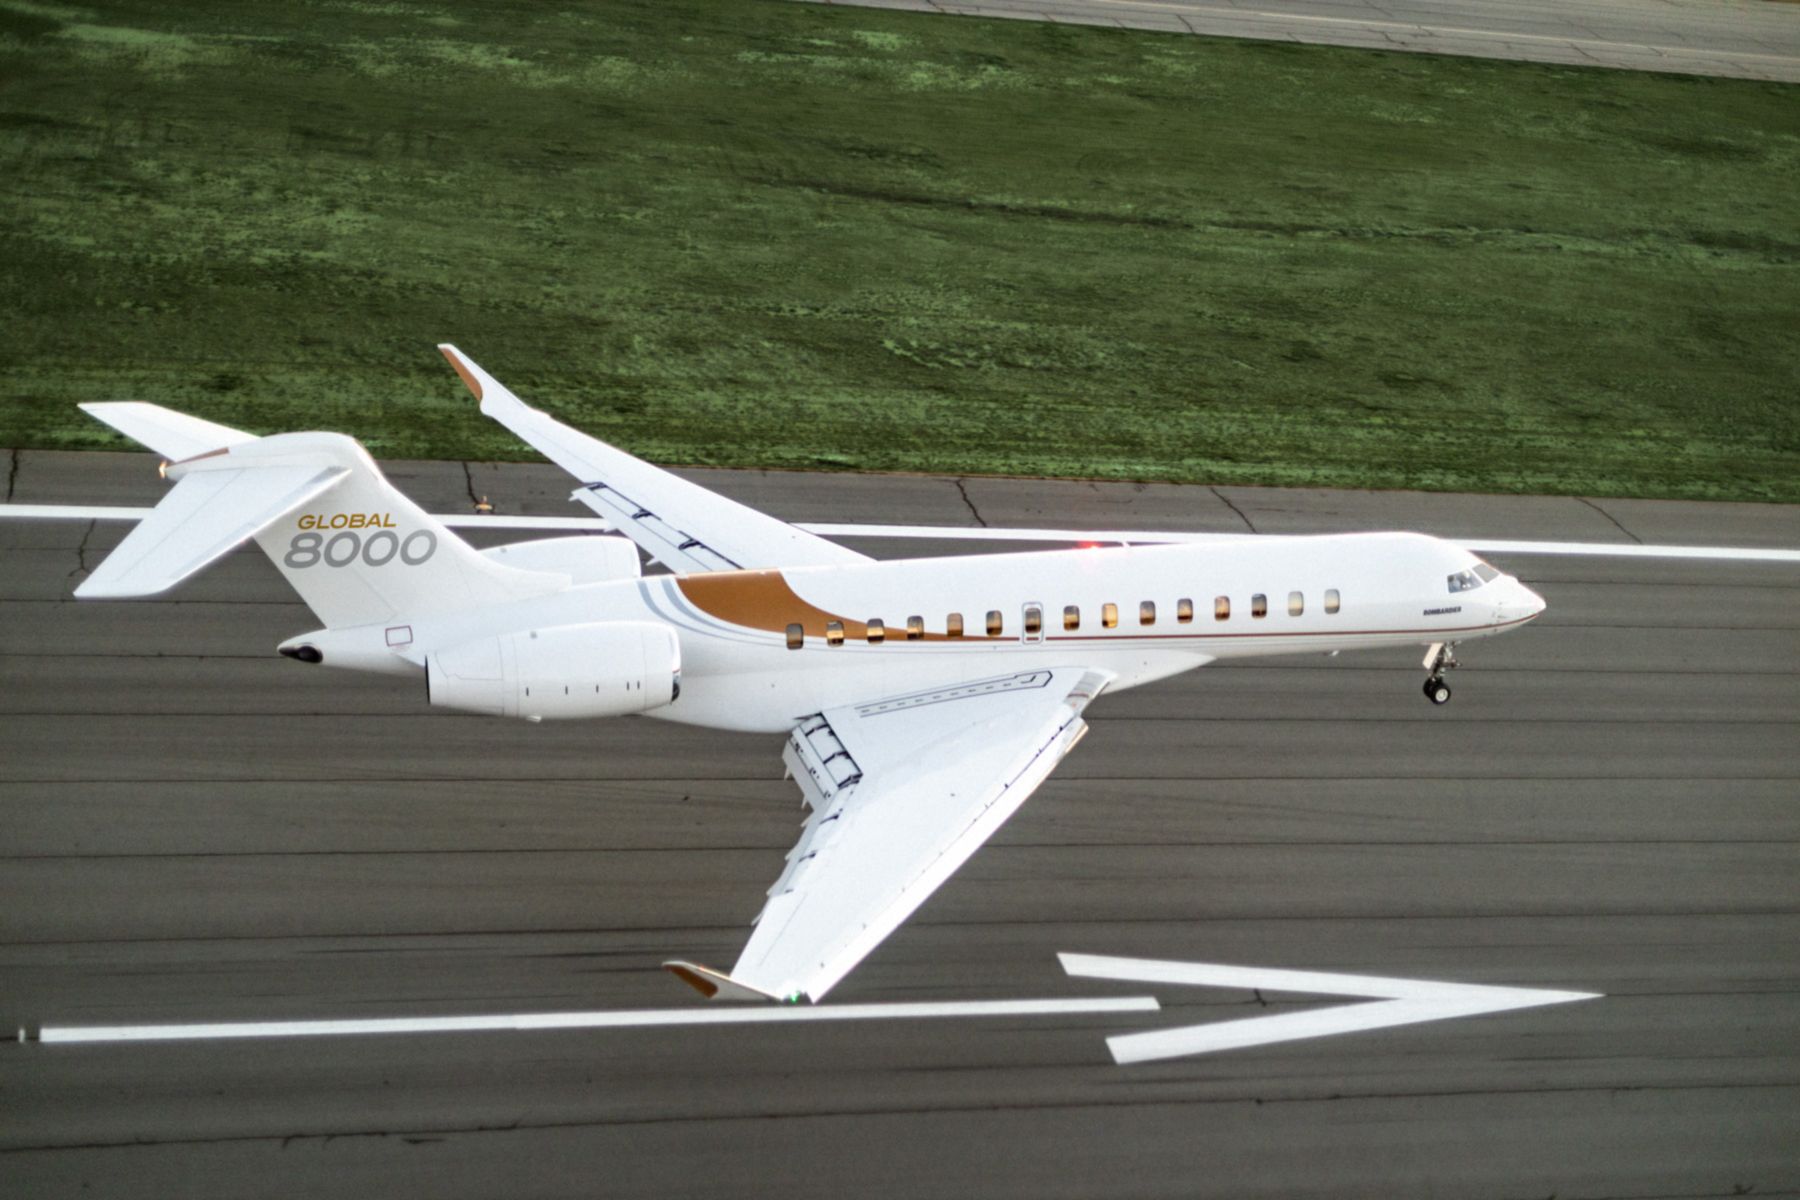 A Bombardier Global 8000 about to land.